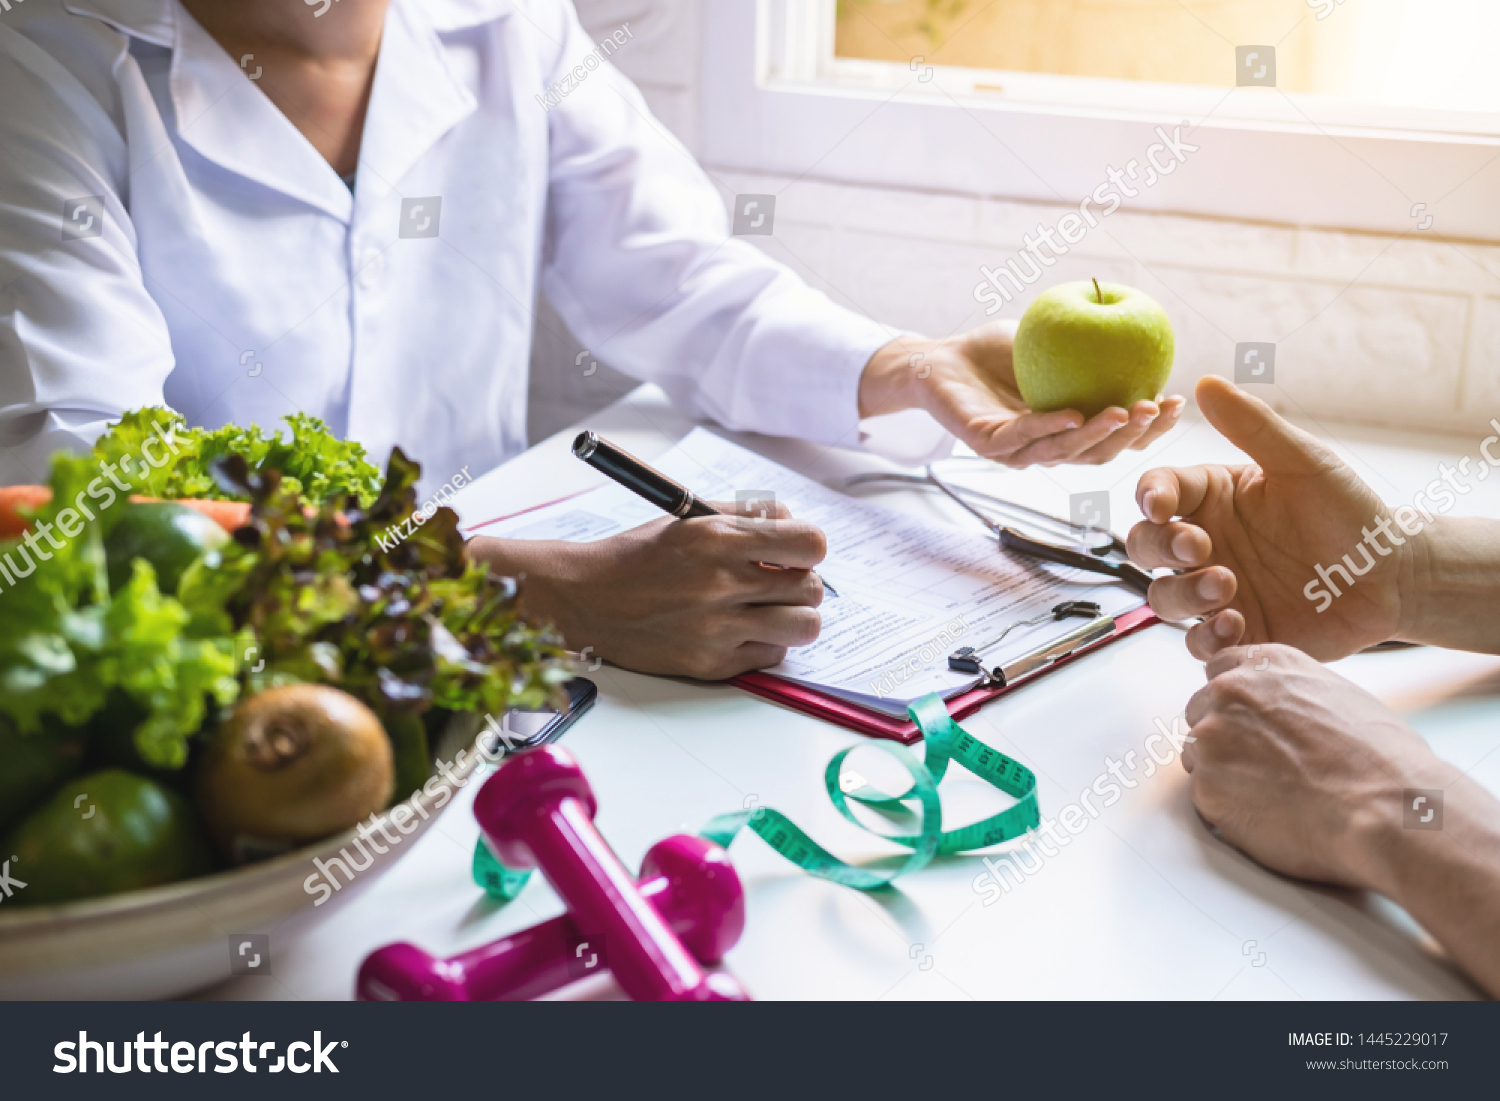 Nutritionist giving consultation to patient with healthy fruit and vegetable, Right nutrition and diet concept #1445229017